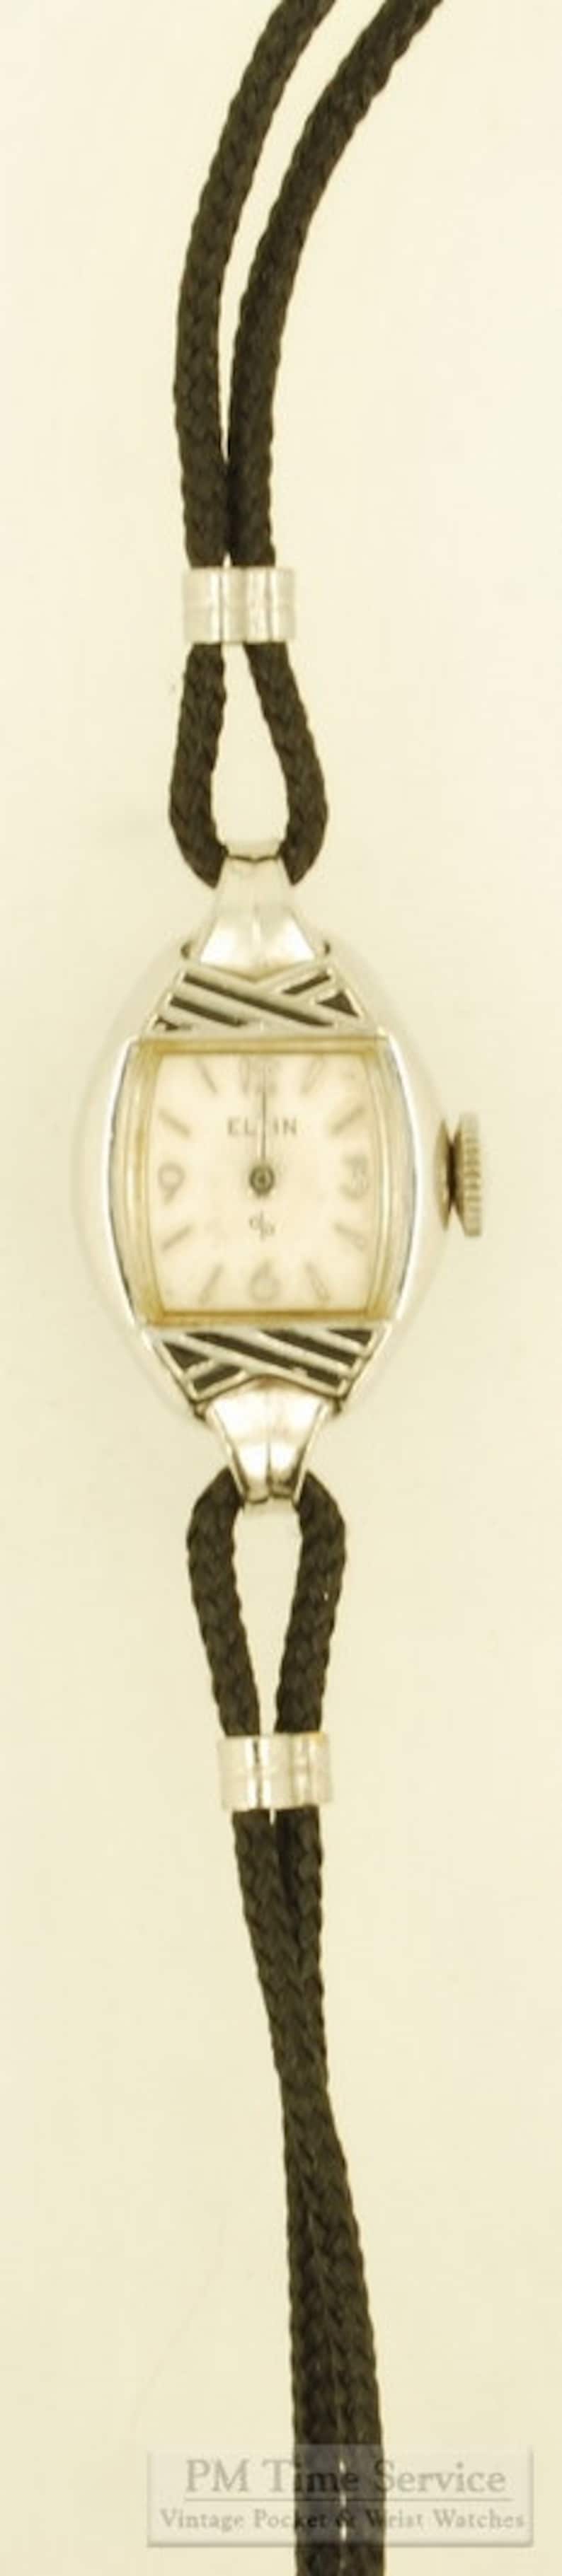 Elgin grade 662 vintage ladies' wrist watch, 17 jewels, lovely white gold filled & stainless steel oval smooth polish case image 3